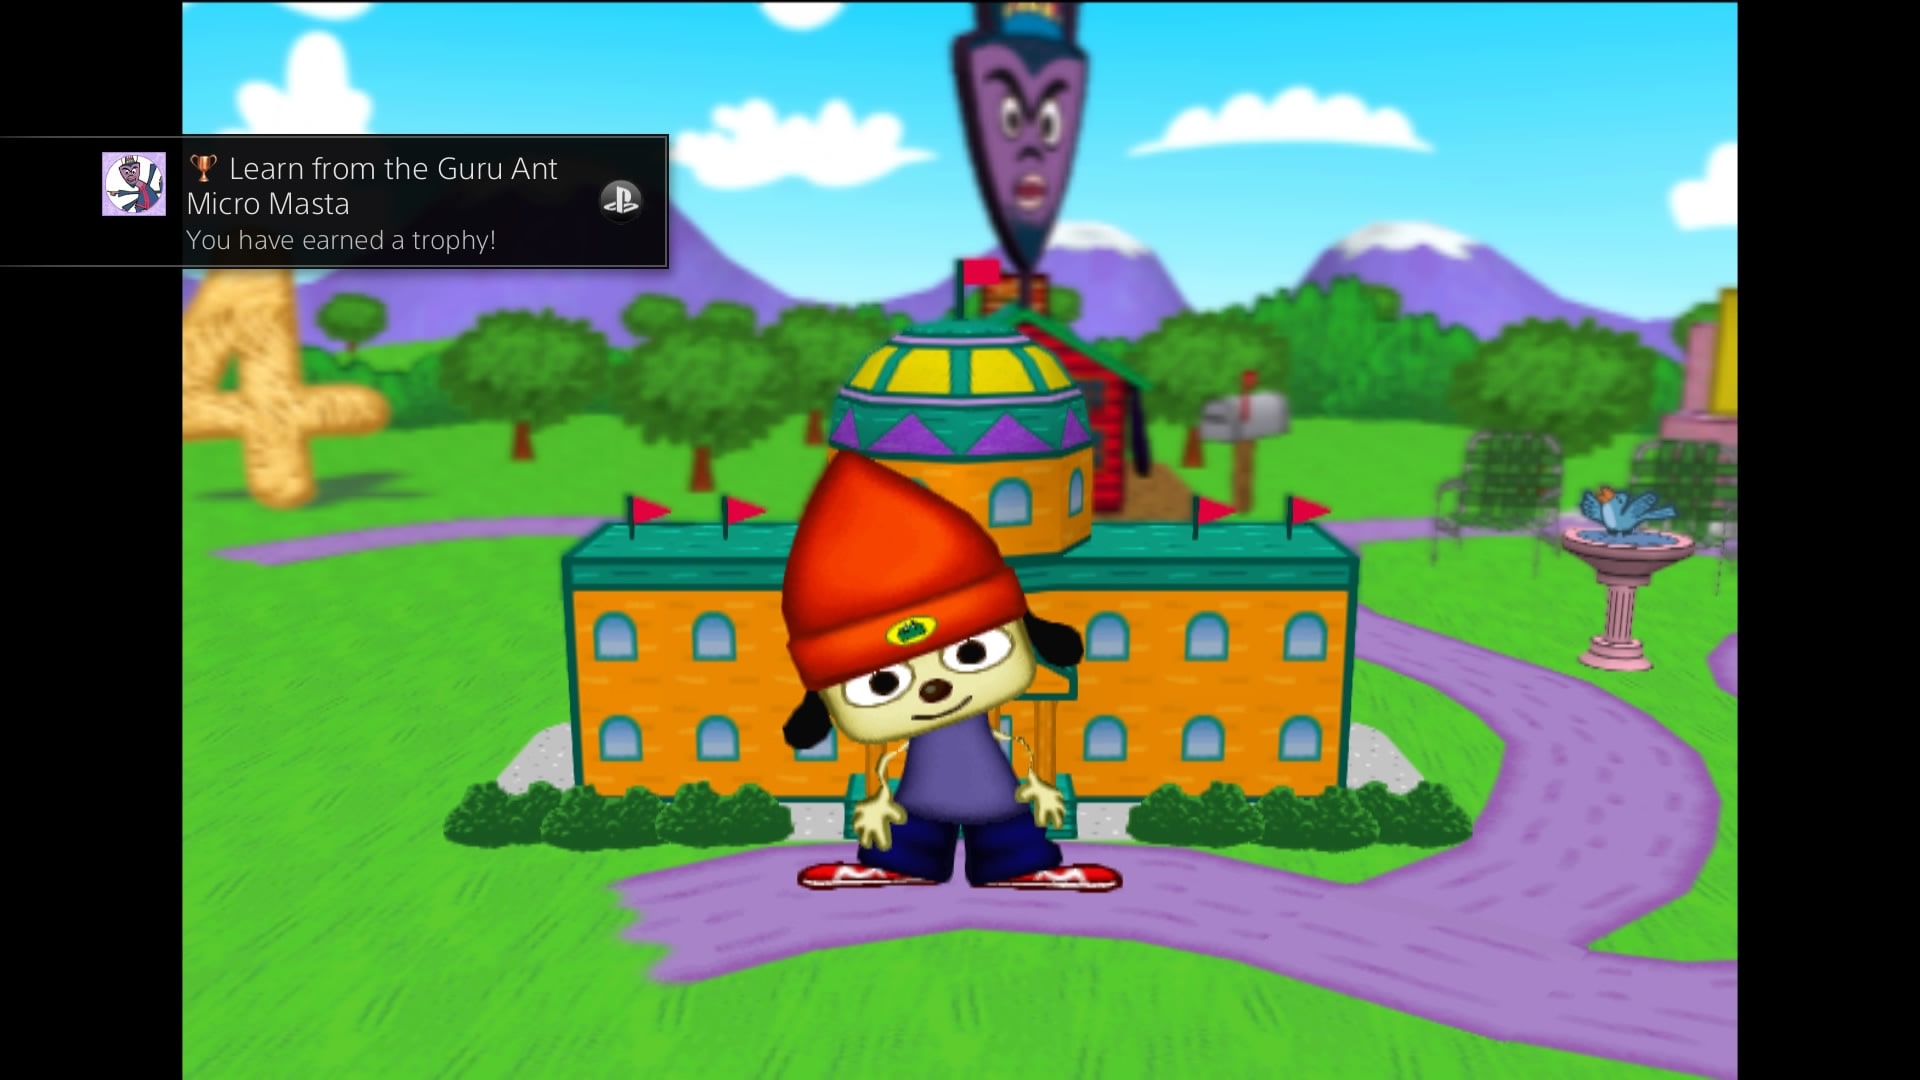 TheGameIsland.com on Instagram: What you know about Parappa the Rapper?  First time I played was on PS2 🔥 Your source for retro video games and  consoles. Visit us Online, In-store or by